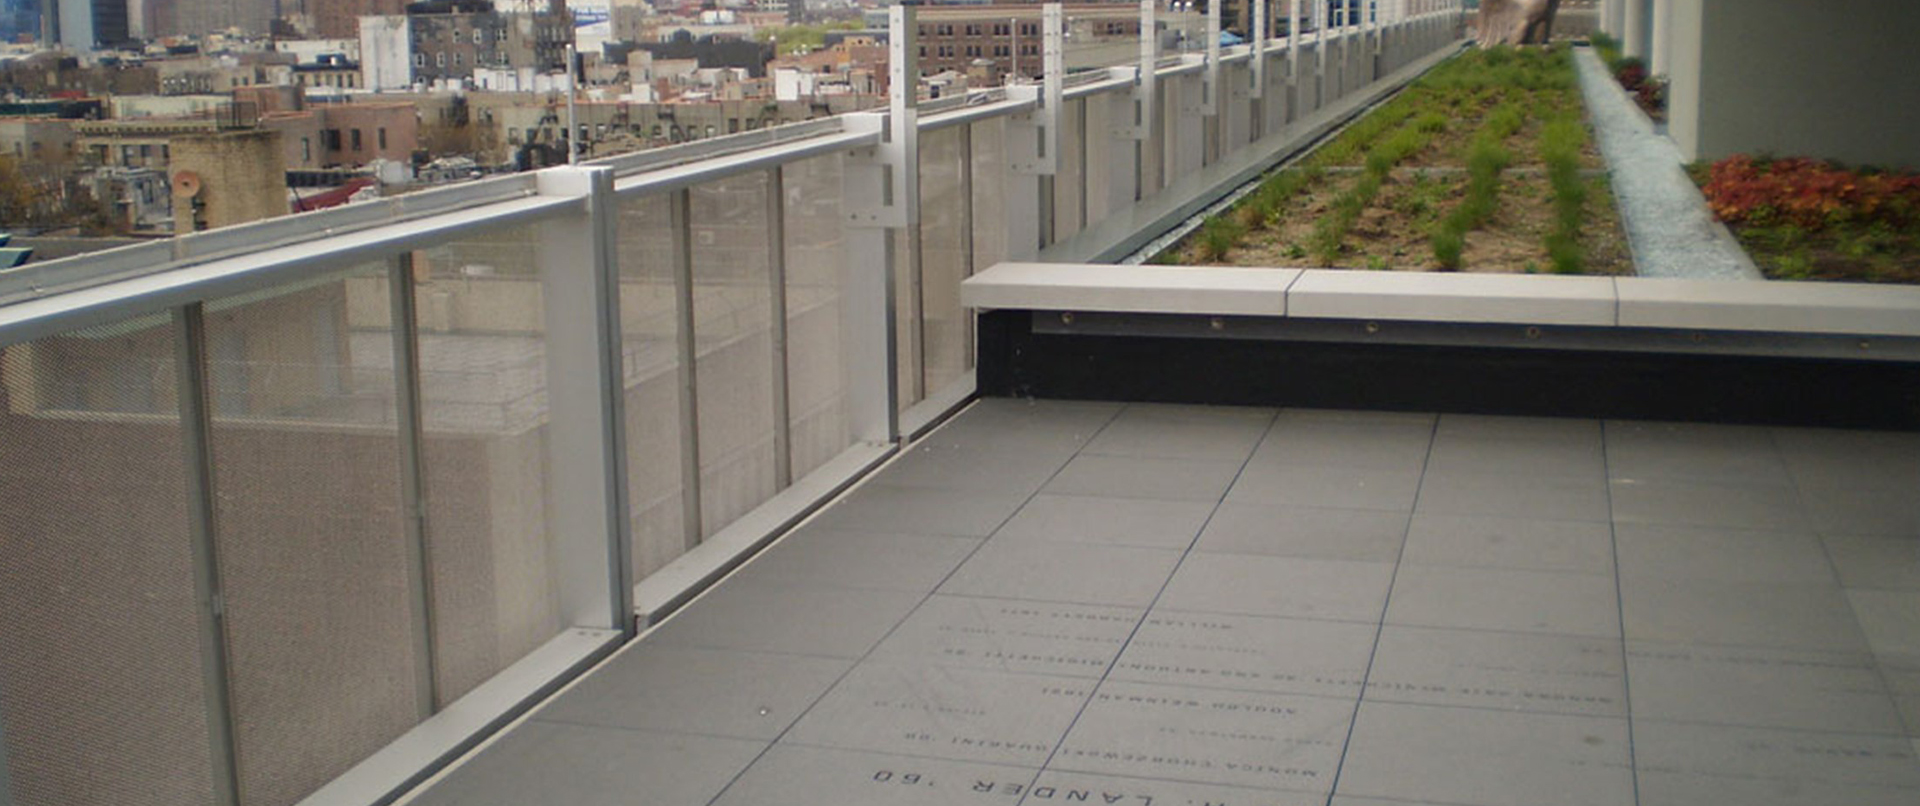 Roof Terrace with Engraved Pavers